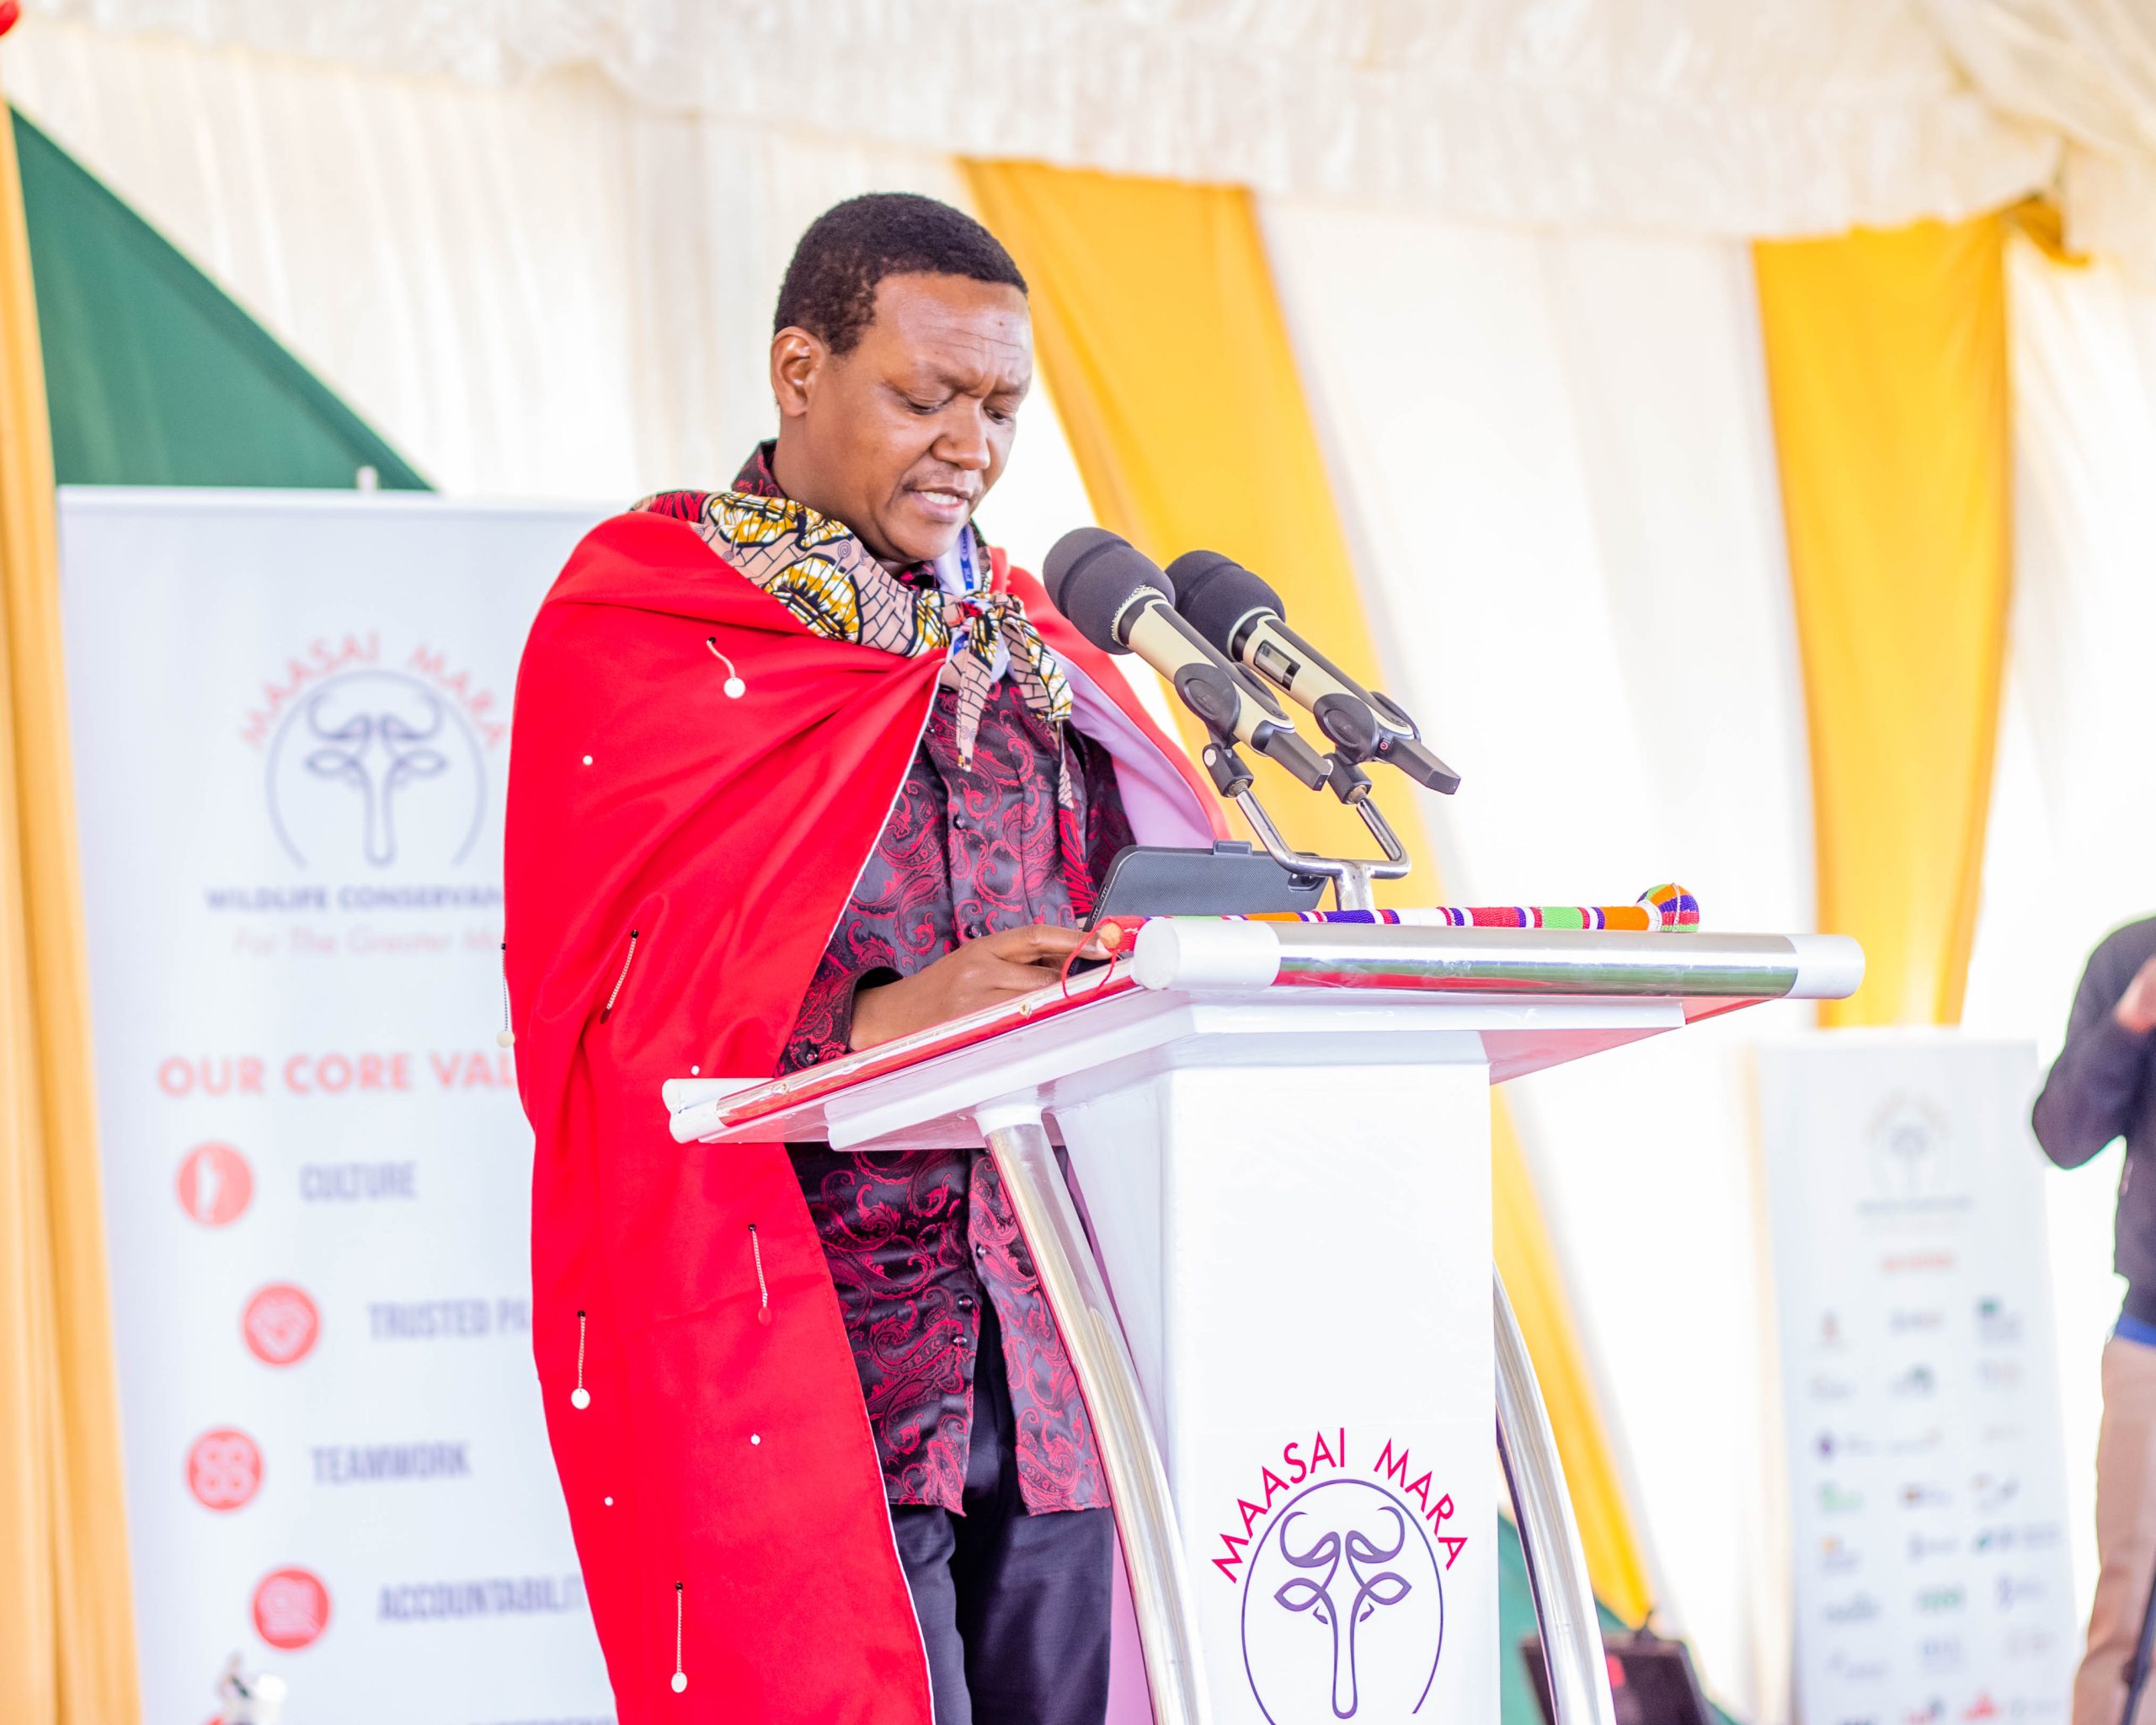 The Cabinet Secretary for Tourism and Wildlife, Dr. Alfred Mutua, giving his speech during the 10th anniversary of the Maasai Mara Wildlife Conservancies, in Narok County.